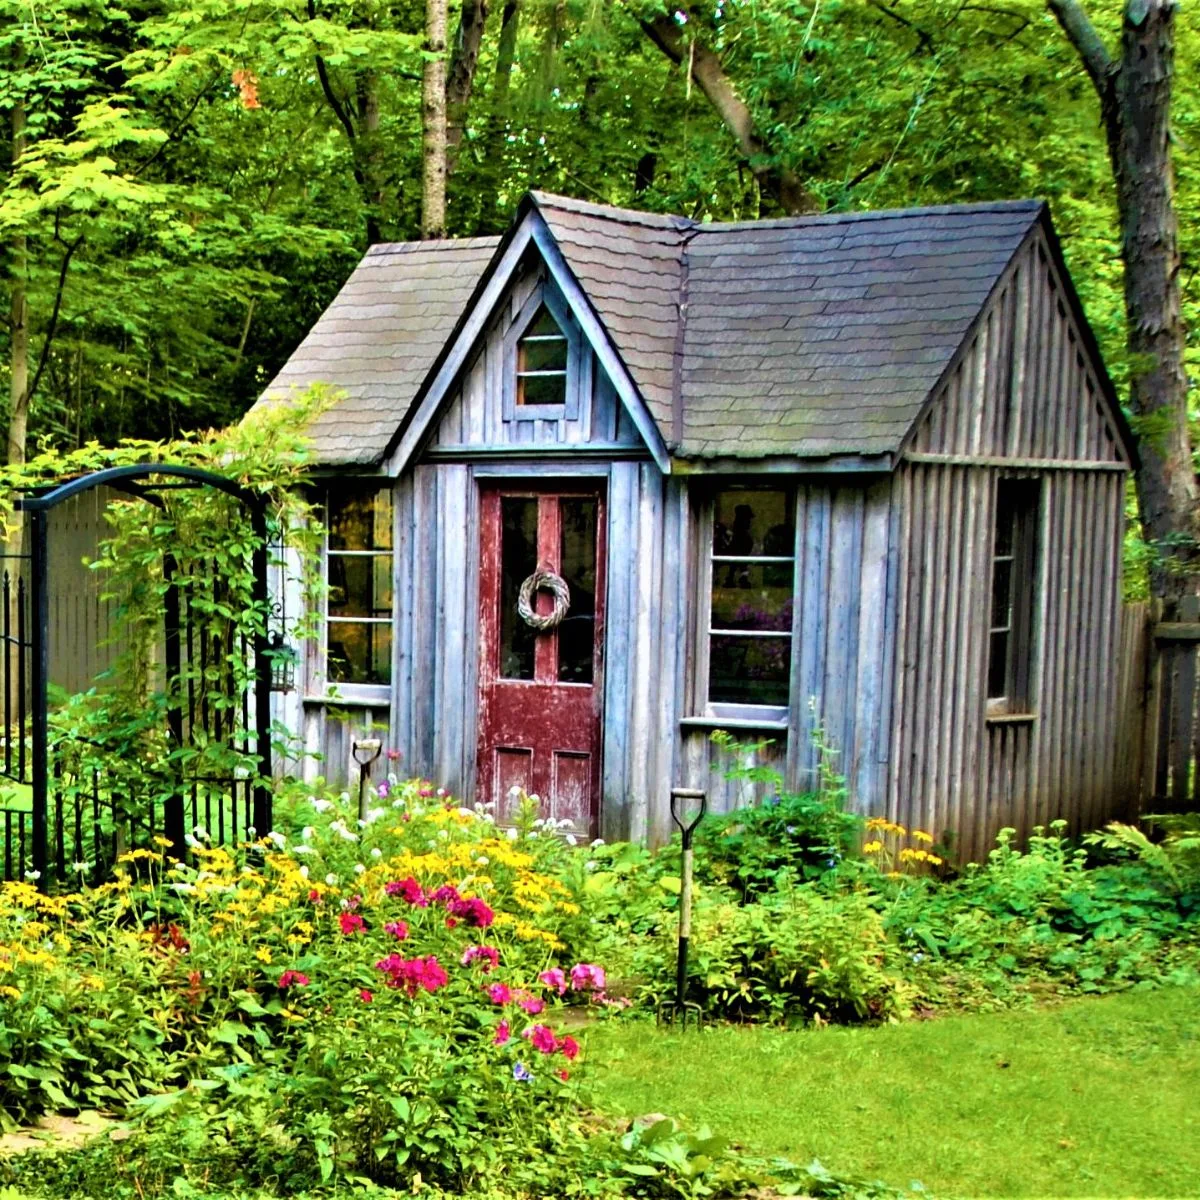 The Harrowsmith house, a beautiful cottage style shed surrounded by nature